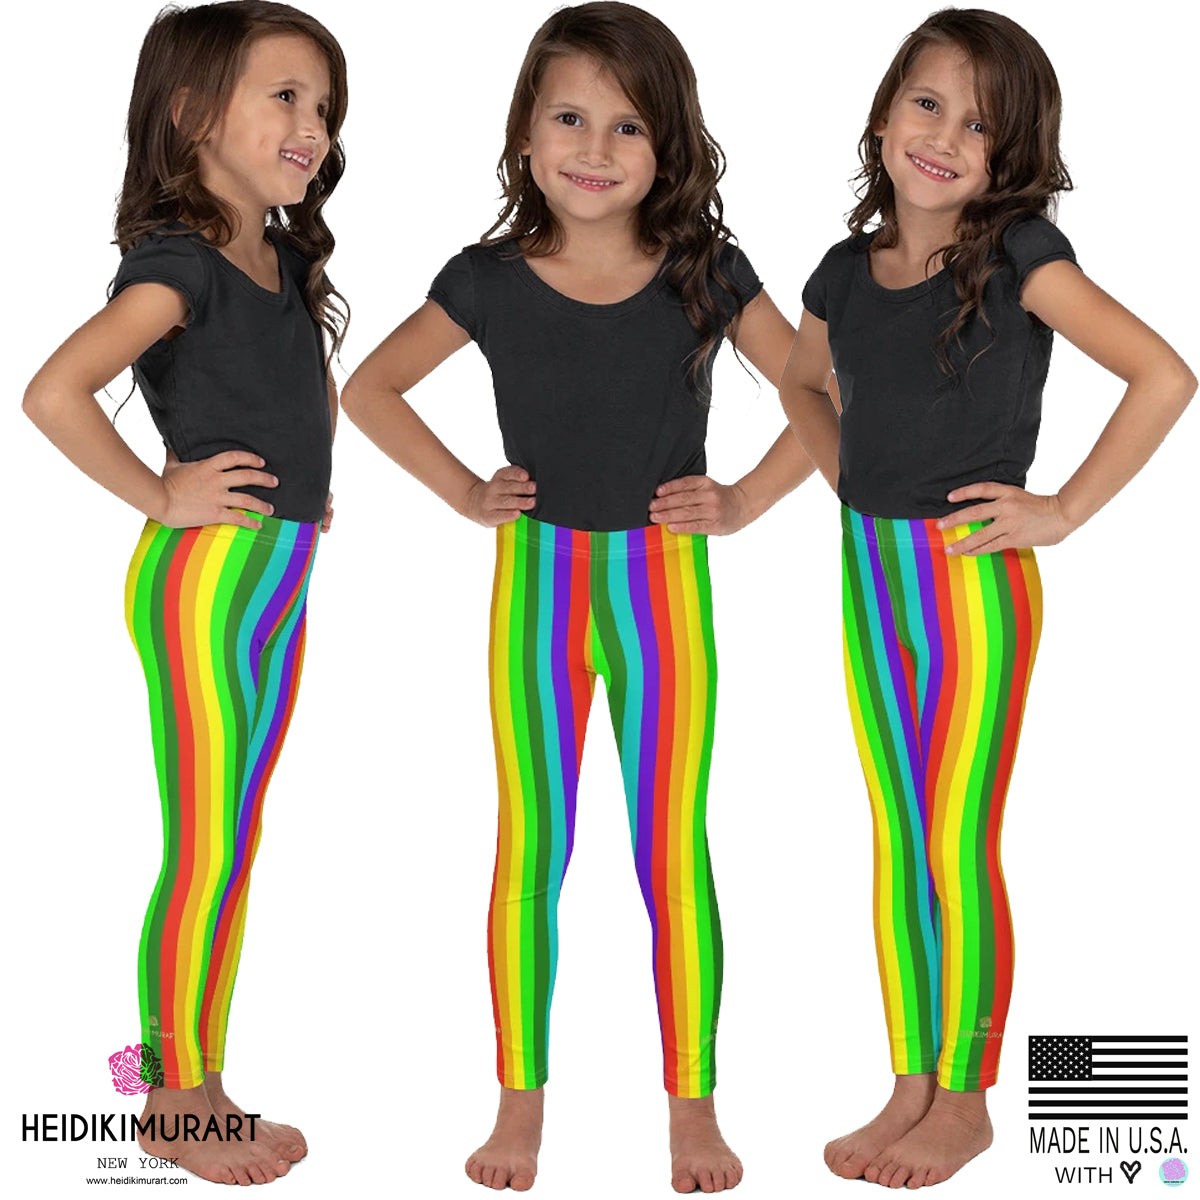 Rainbow Kid's Leggings, Modern Stylish Rainbow Vertical Stripe Print Designer Kid's Girl's Leggings Active Wear 38-40 UPF Fitness Workout Gym Wear Running Tights, Comfy Stretchy Pants (2T-7) Made in USA/EU, Girls' Leggings & Pants, Leggings For Girls, Designer Girls Leggings Tights, Leggings For Girl Child